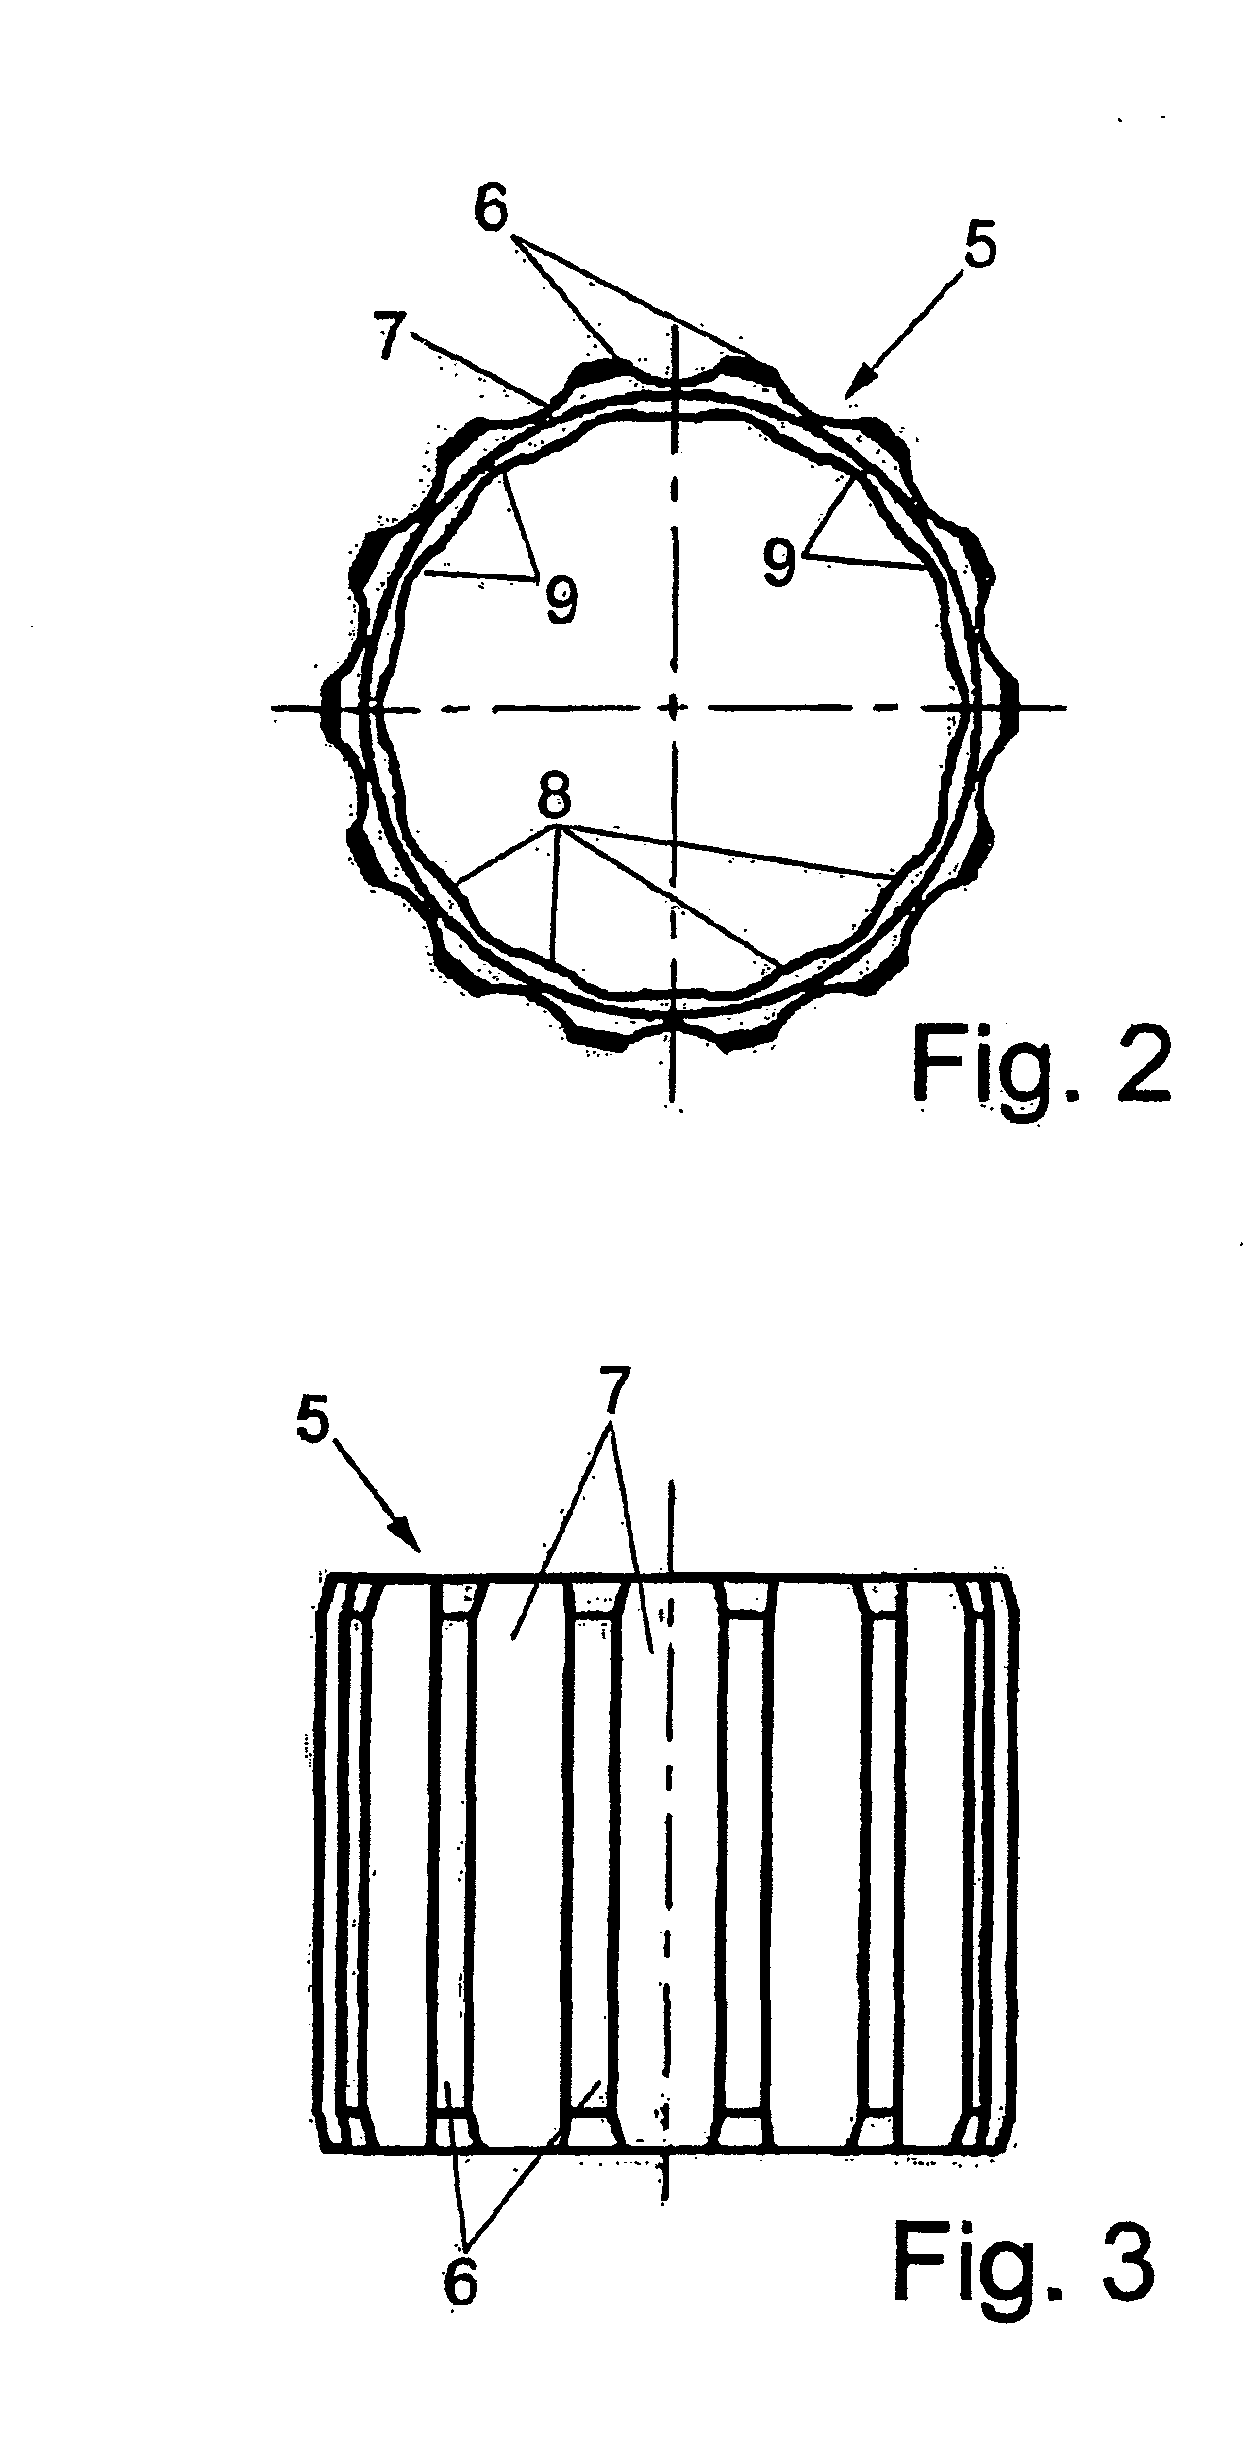 Disc Brake for a Commercial Vehicle